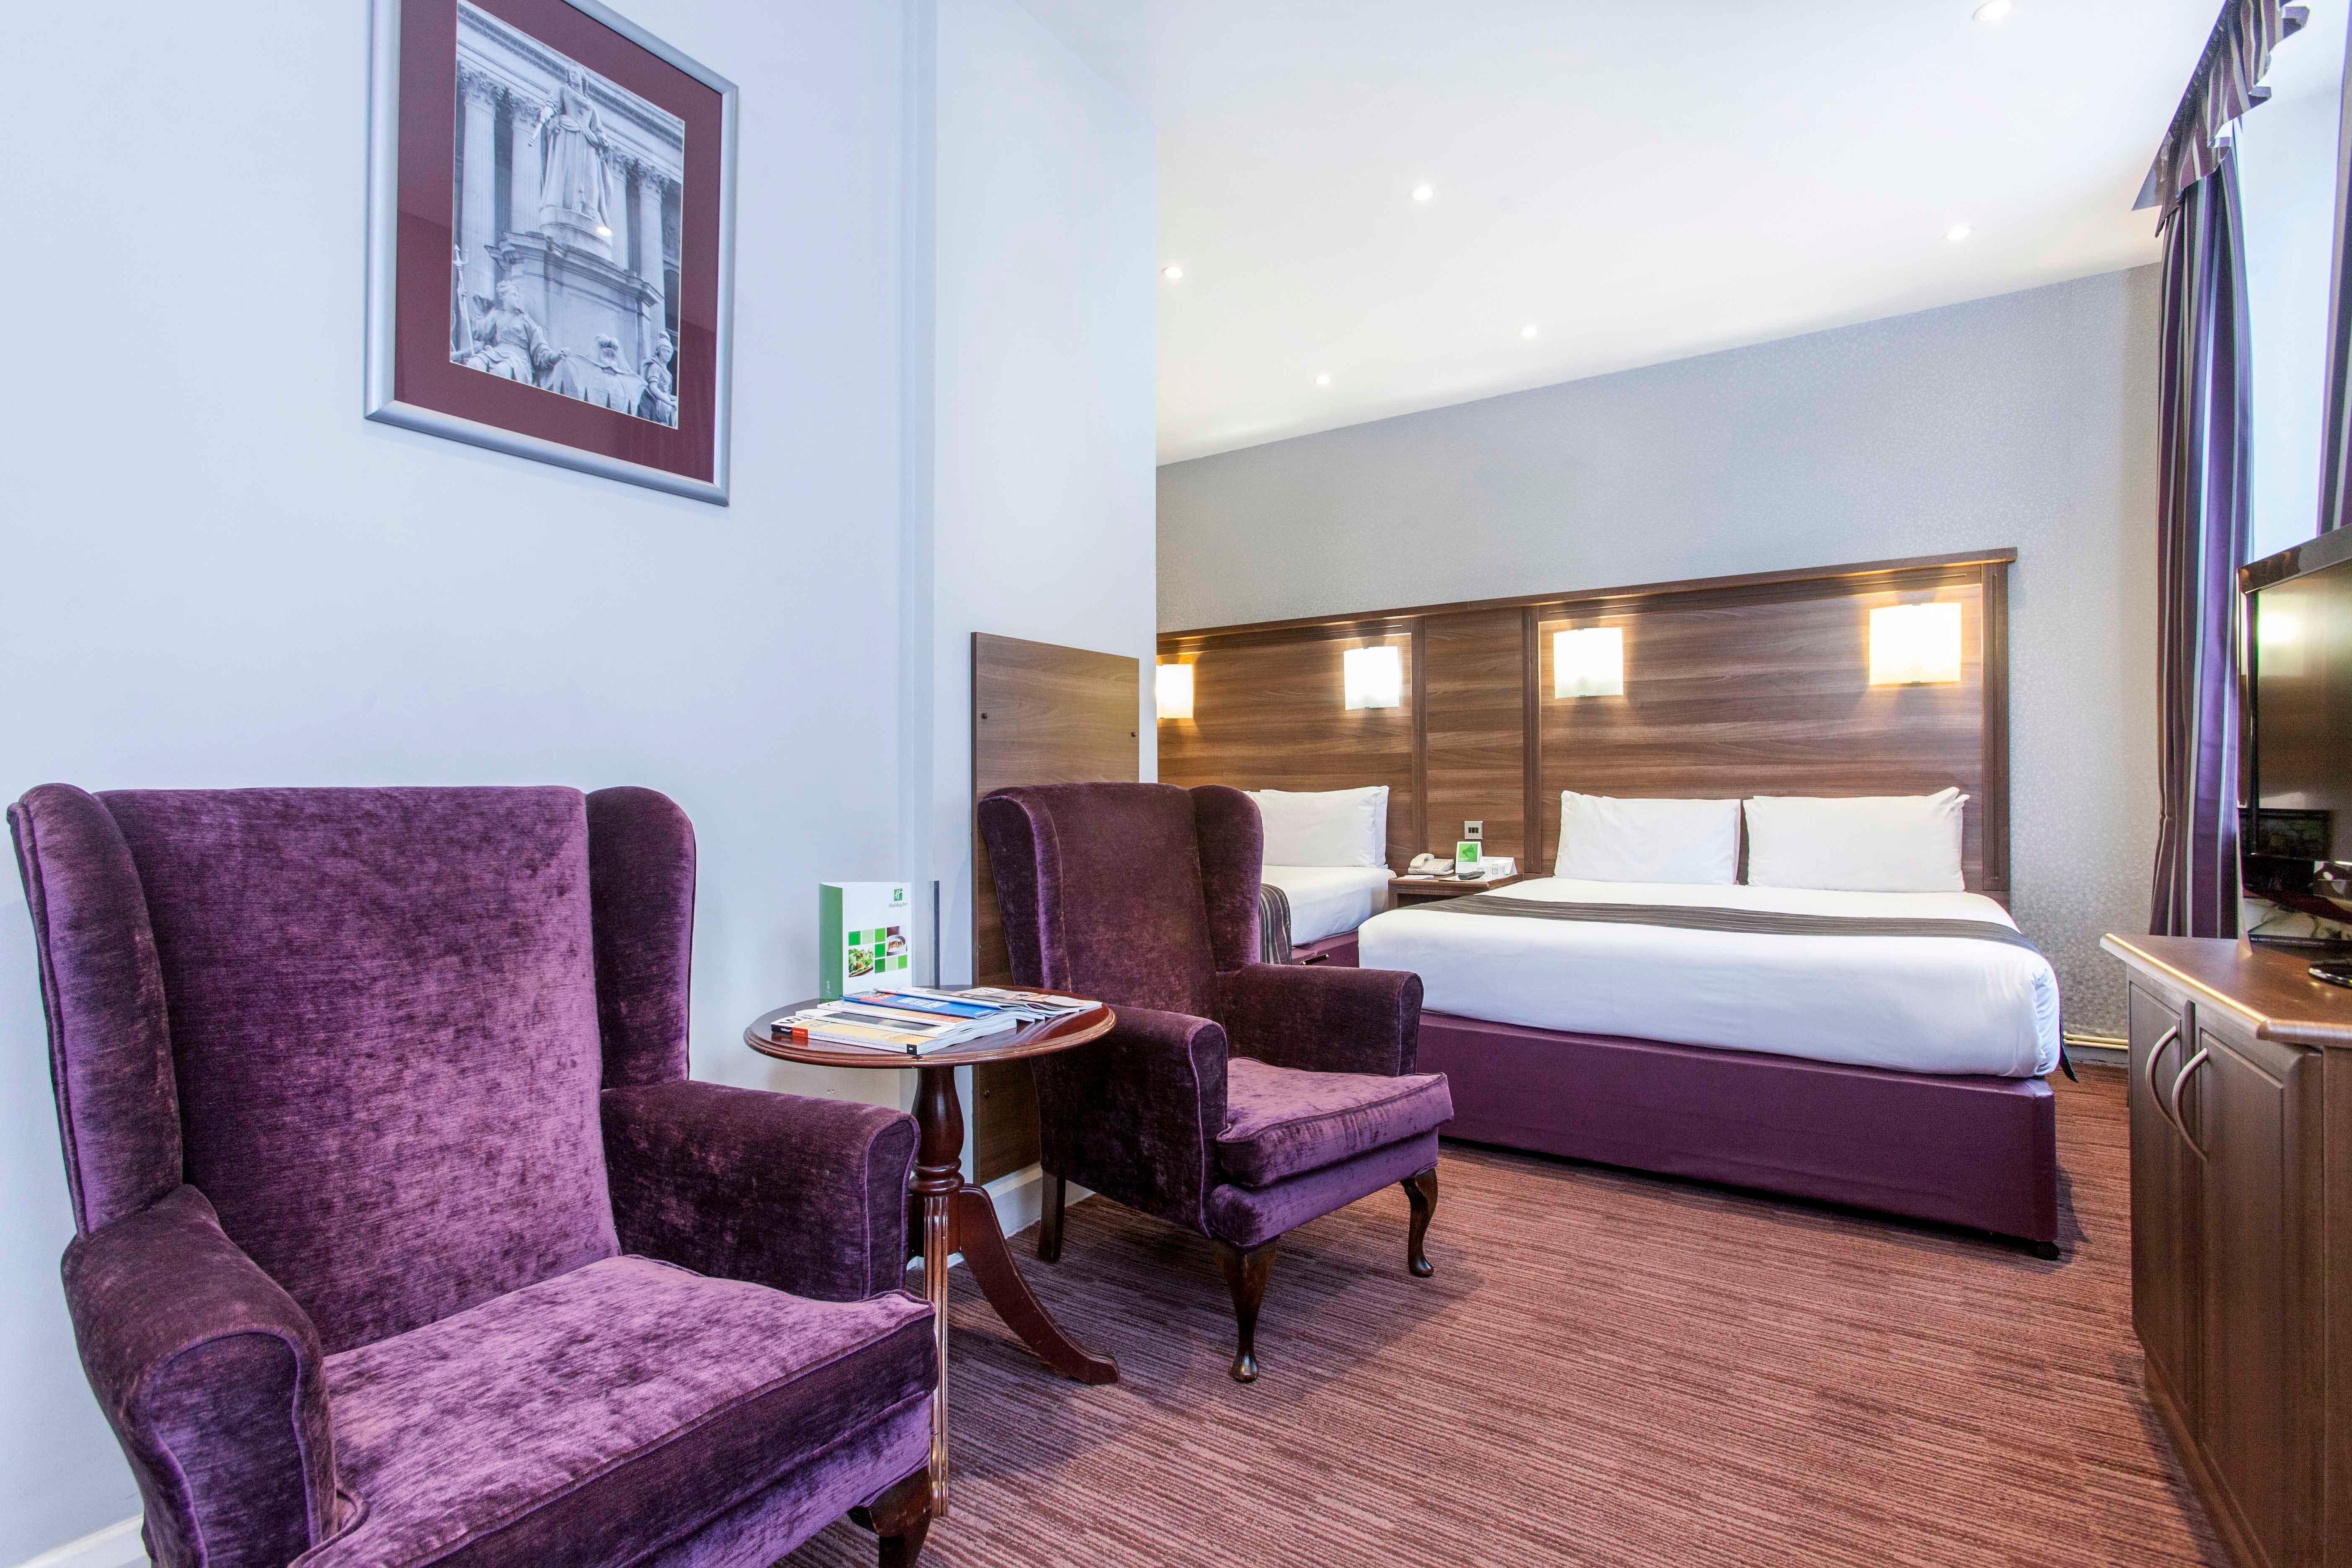 Gallery image of Holiday Inn Oxford Circus